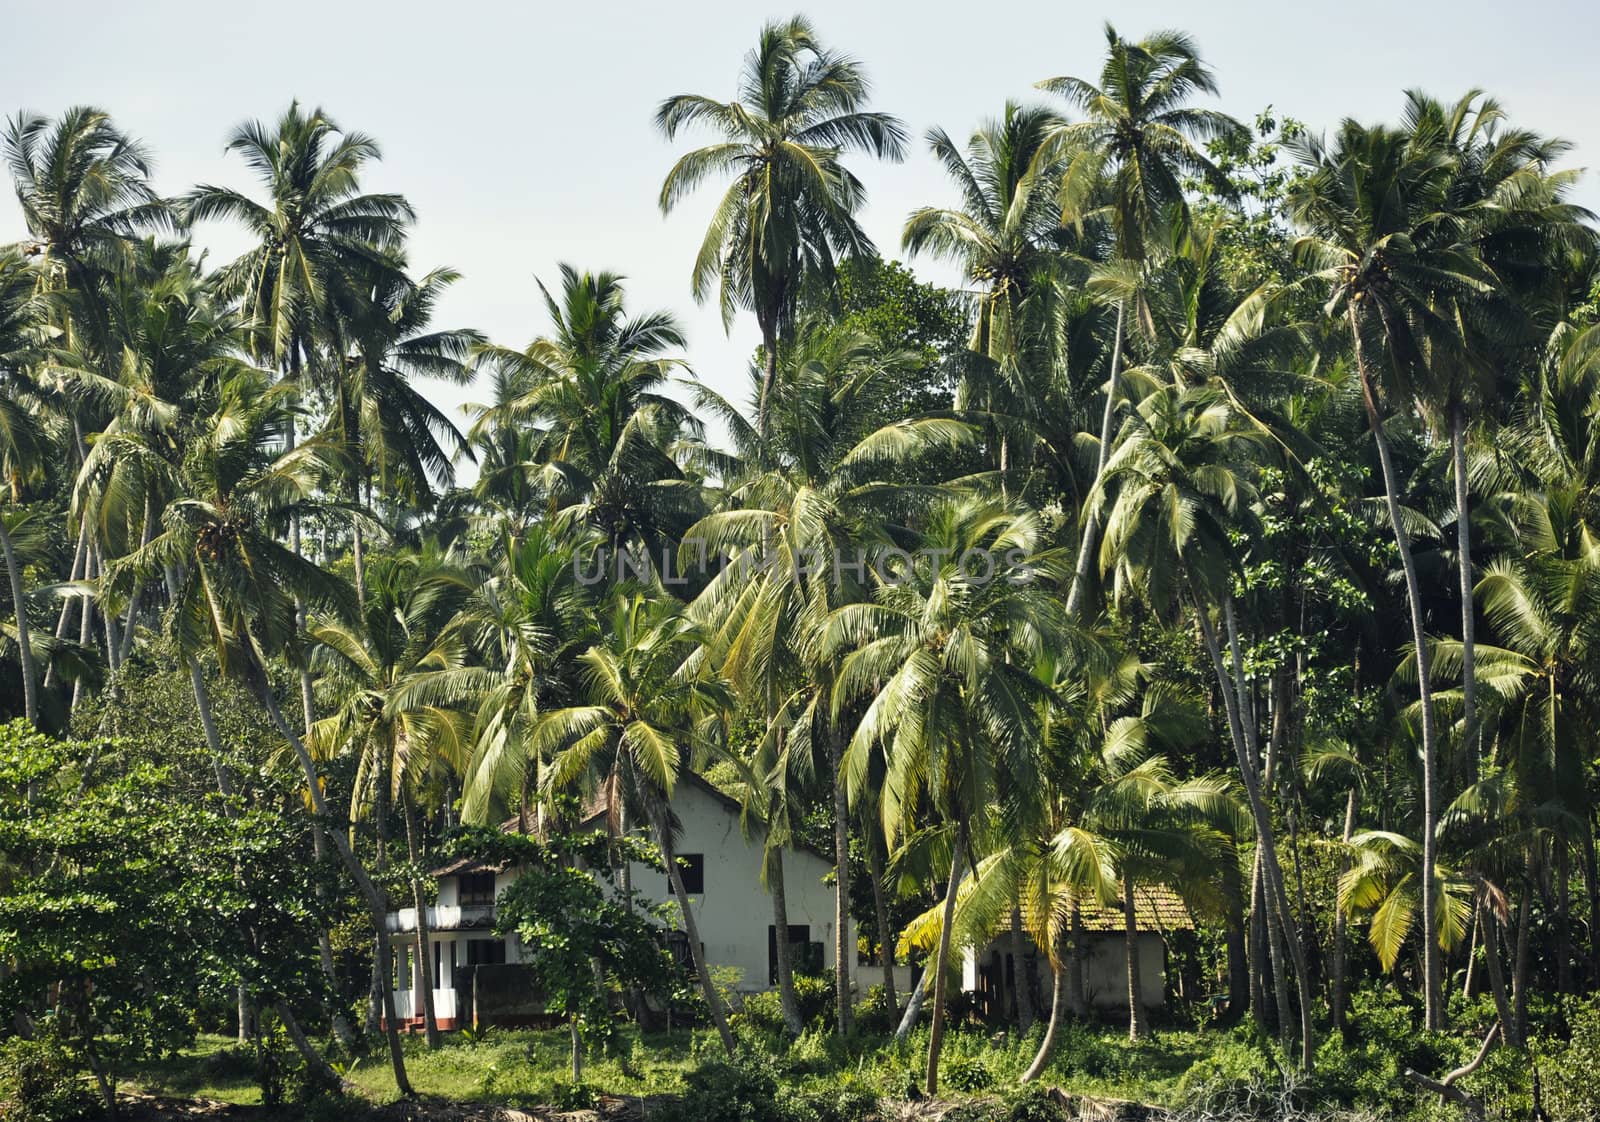 The view of a house surrounded by palm trees in Sri Lanka